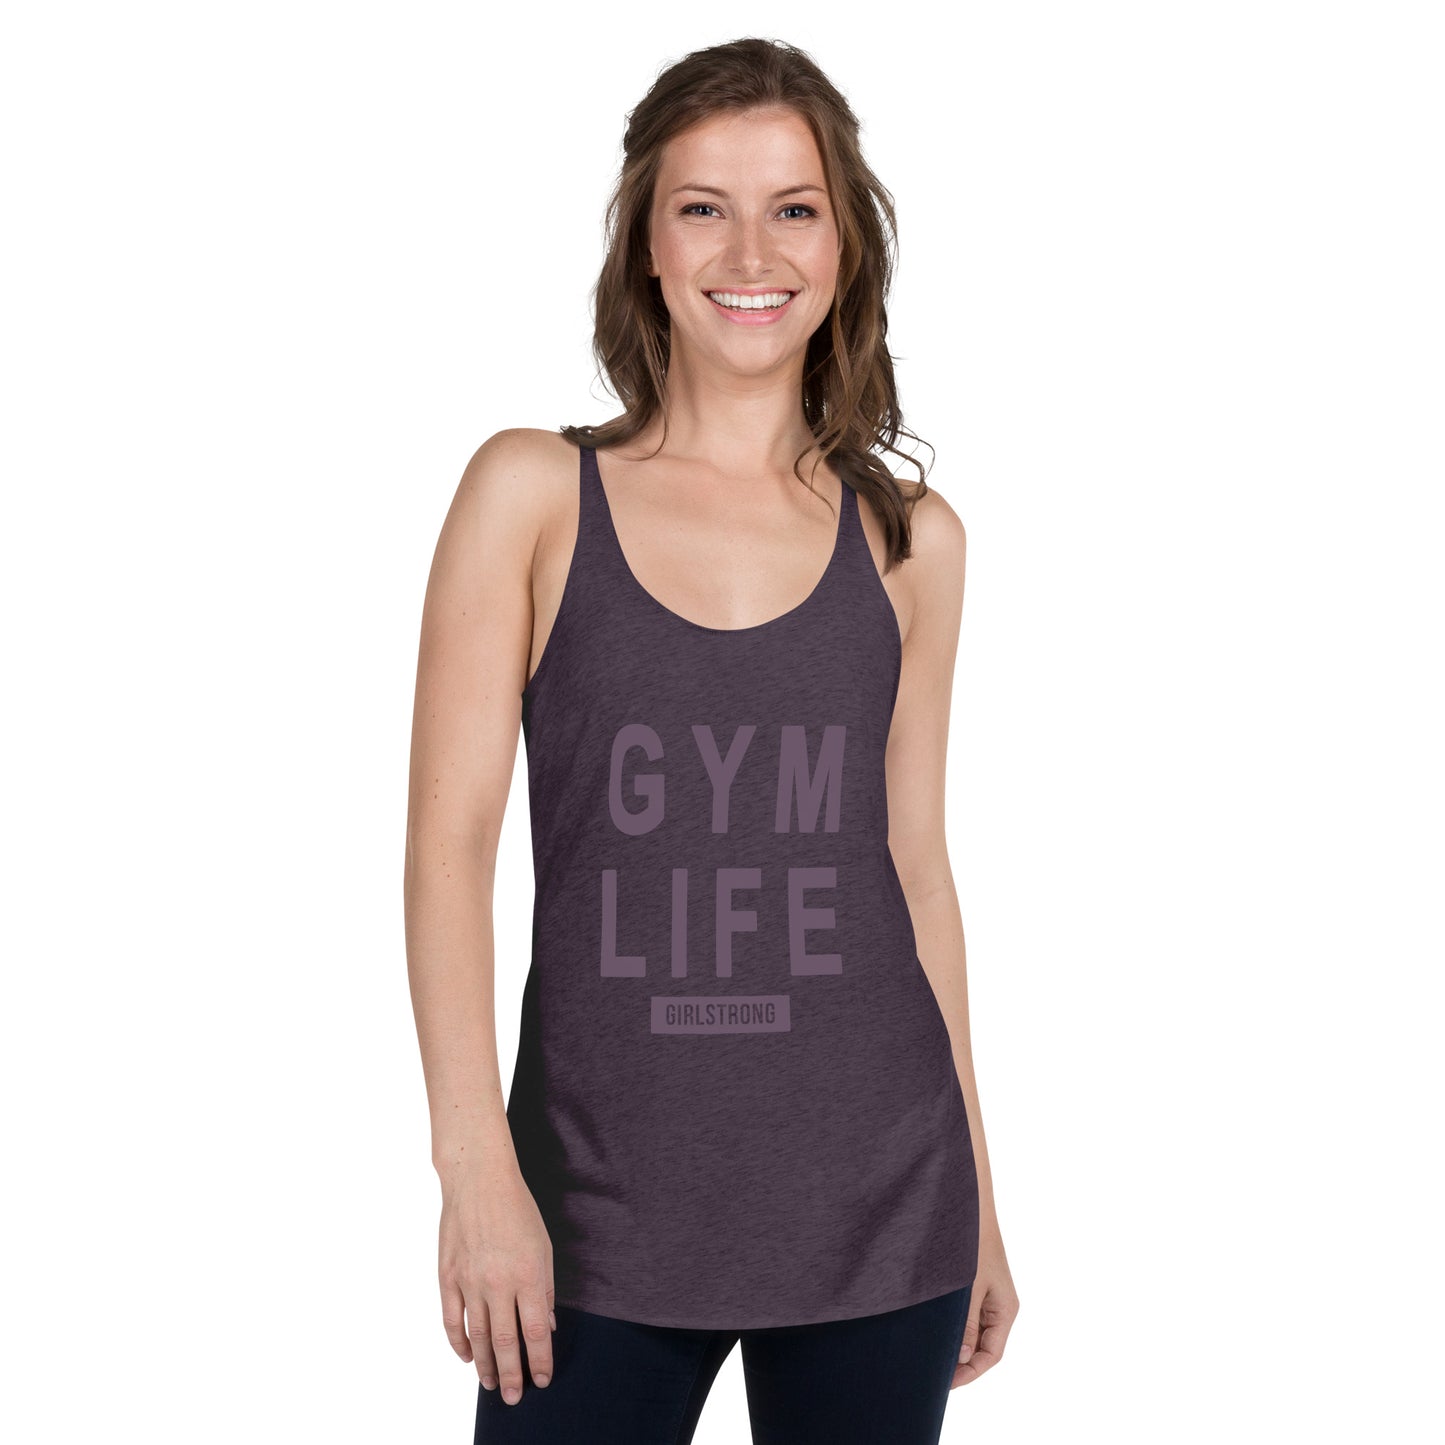 ELEVATED TRIBLEND RACERBACK PURPLE TANK TOP FOR WOMEN - GYM LIFE